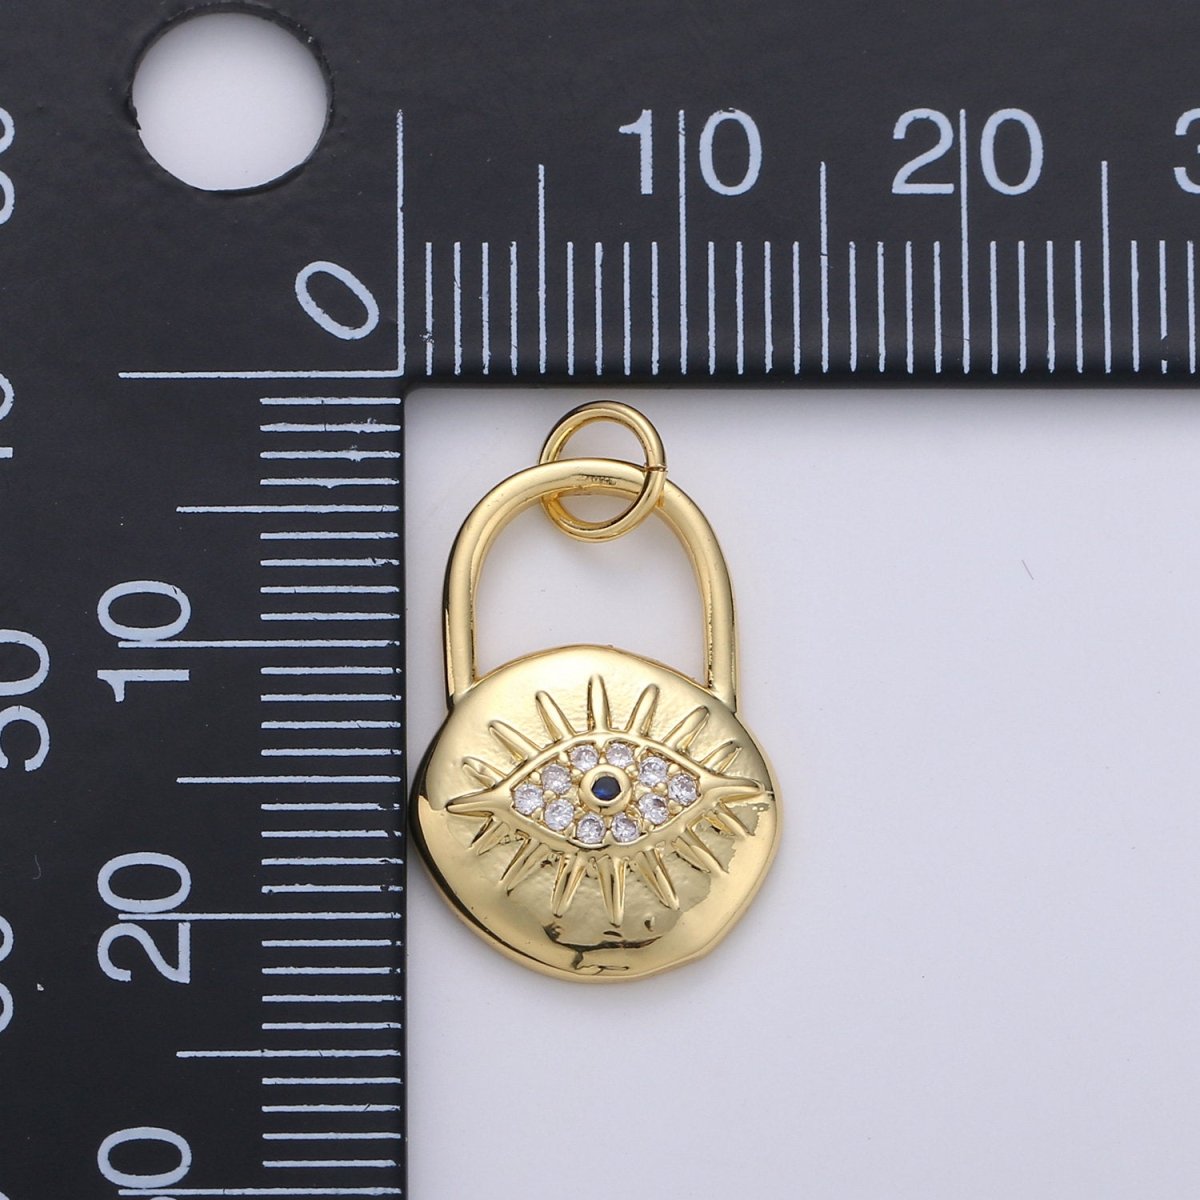 Gold Padlock pendant charm with cz• 23x12mm •24k Gold Filled• Sparkly Cubic Zirconia CZ Evil Eye Charm • Small Charm for Necklace Bracelet D-238 - DLUXCA